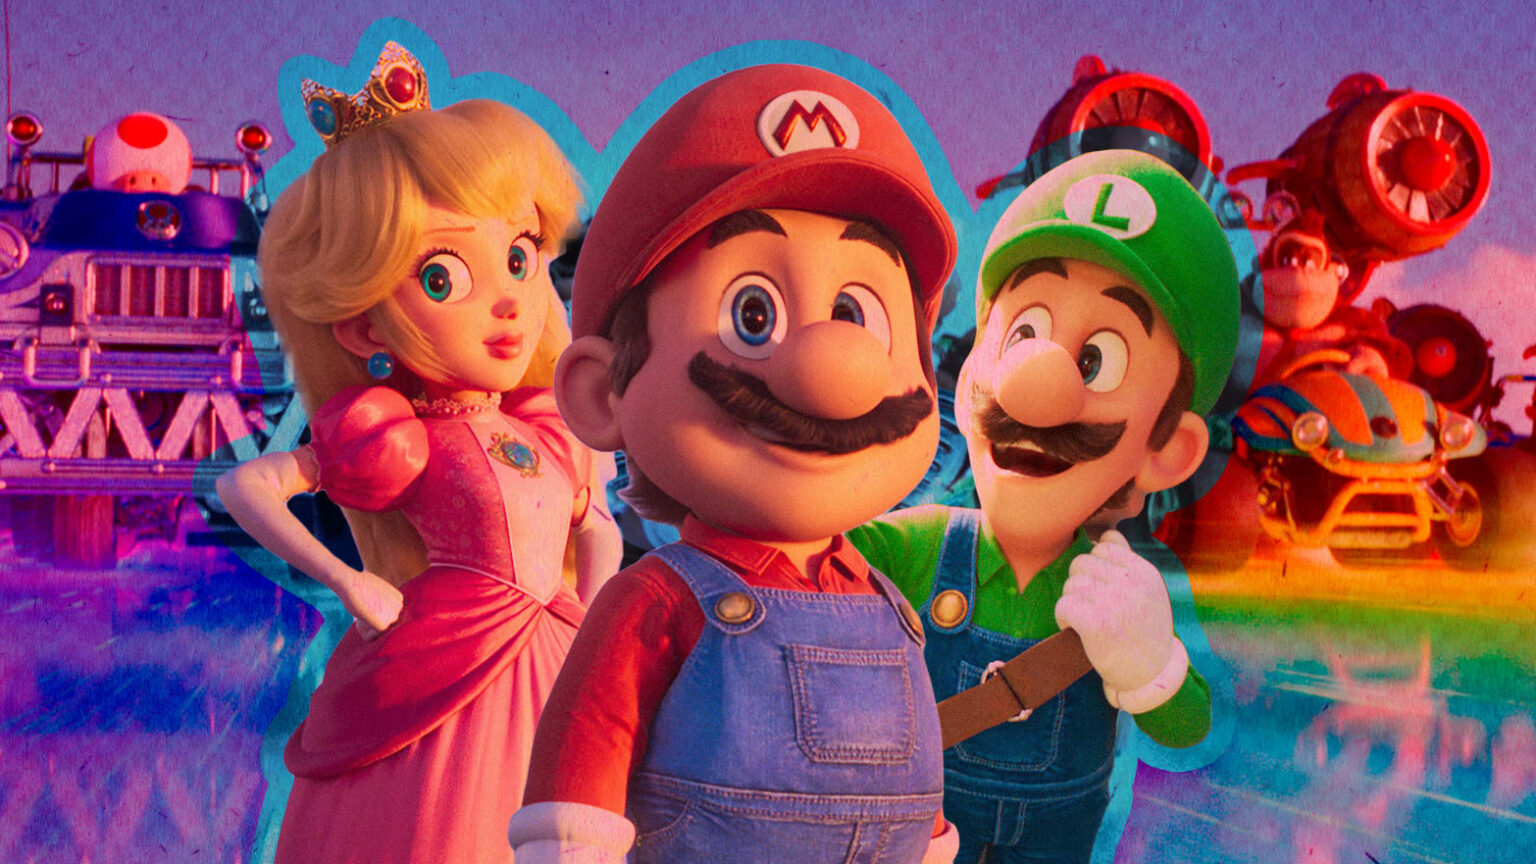 (123movies) Watch ‘The Super Mario Bros Movie’ Free Online Streaming at